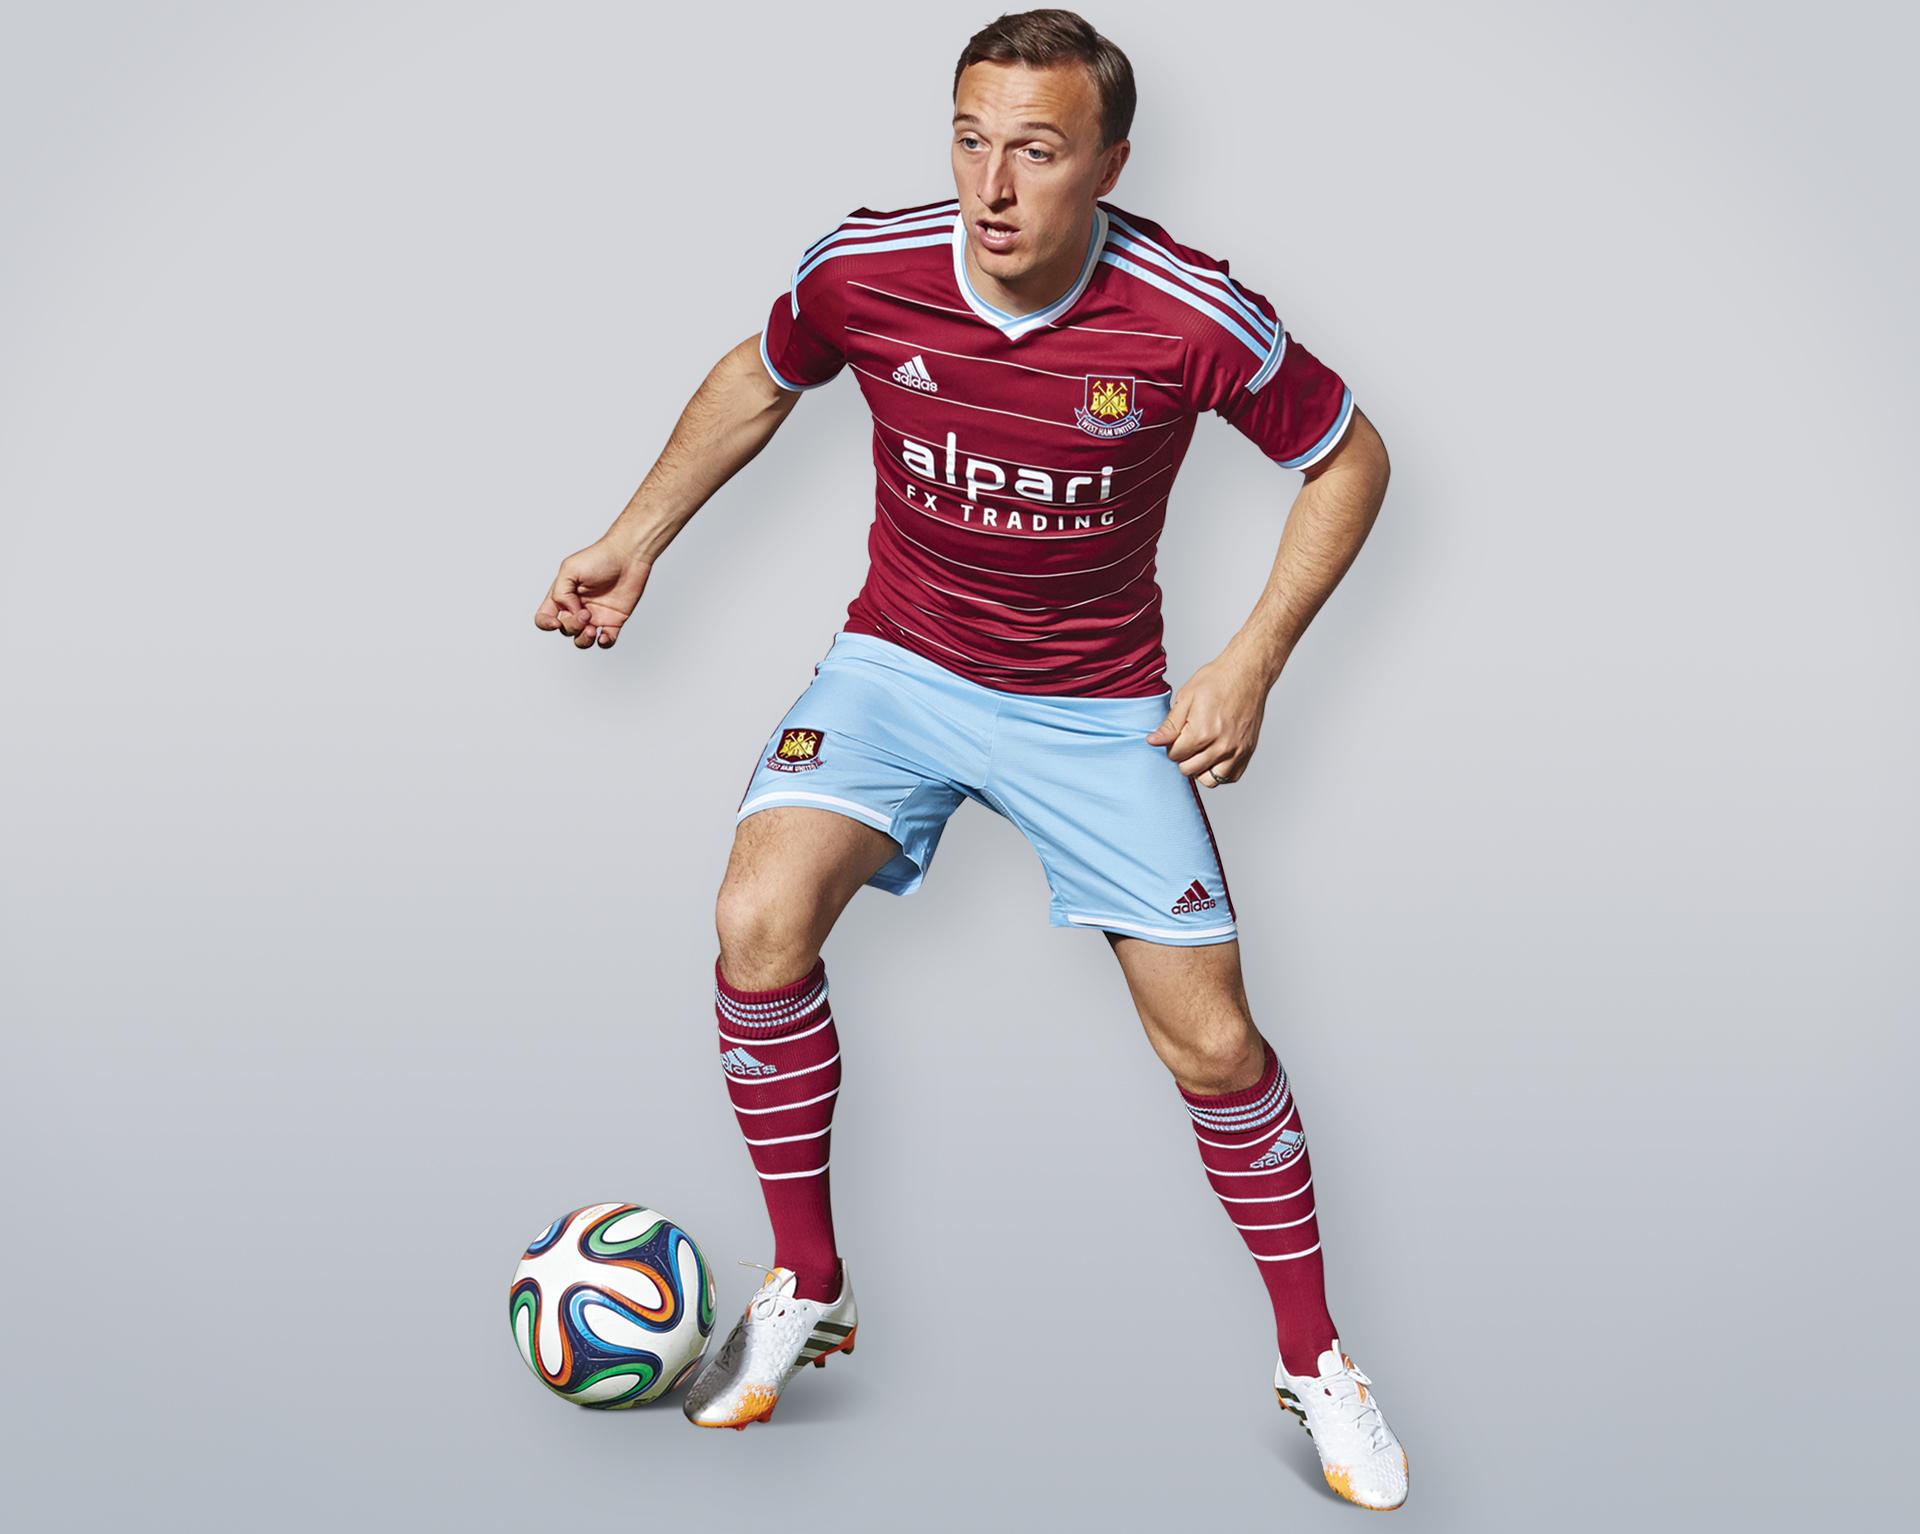 Brochure Coöperatie ontvangen West Ham United on Twitter: "HOME KIT: The new @adidasuk 2014/15 home kit  is now on sale from http://t.co/ZdSleckNgu #COYI #WHUFC  http://t.co/f57VQJM0Wi" / Twitter